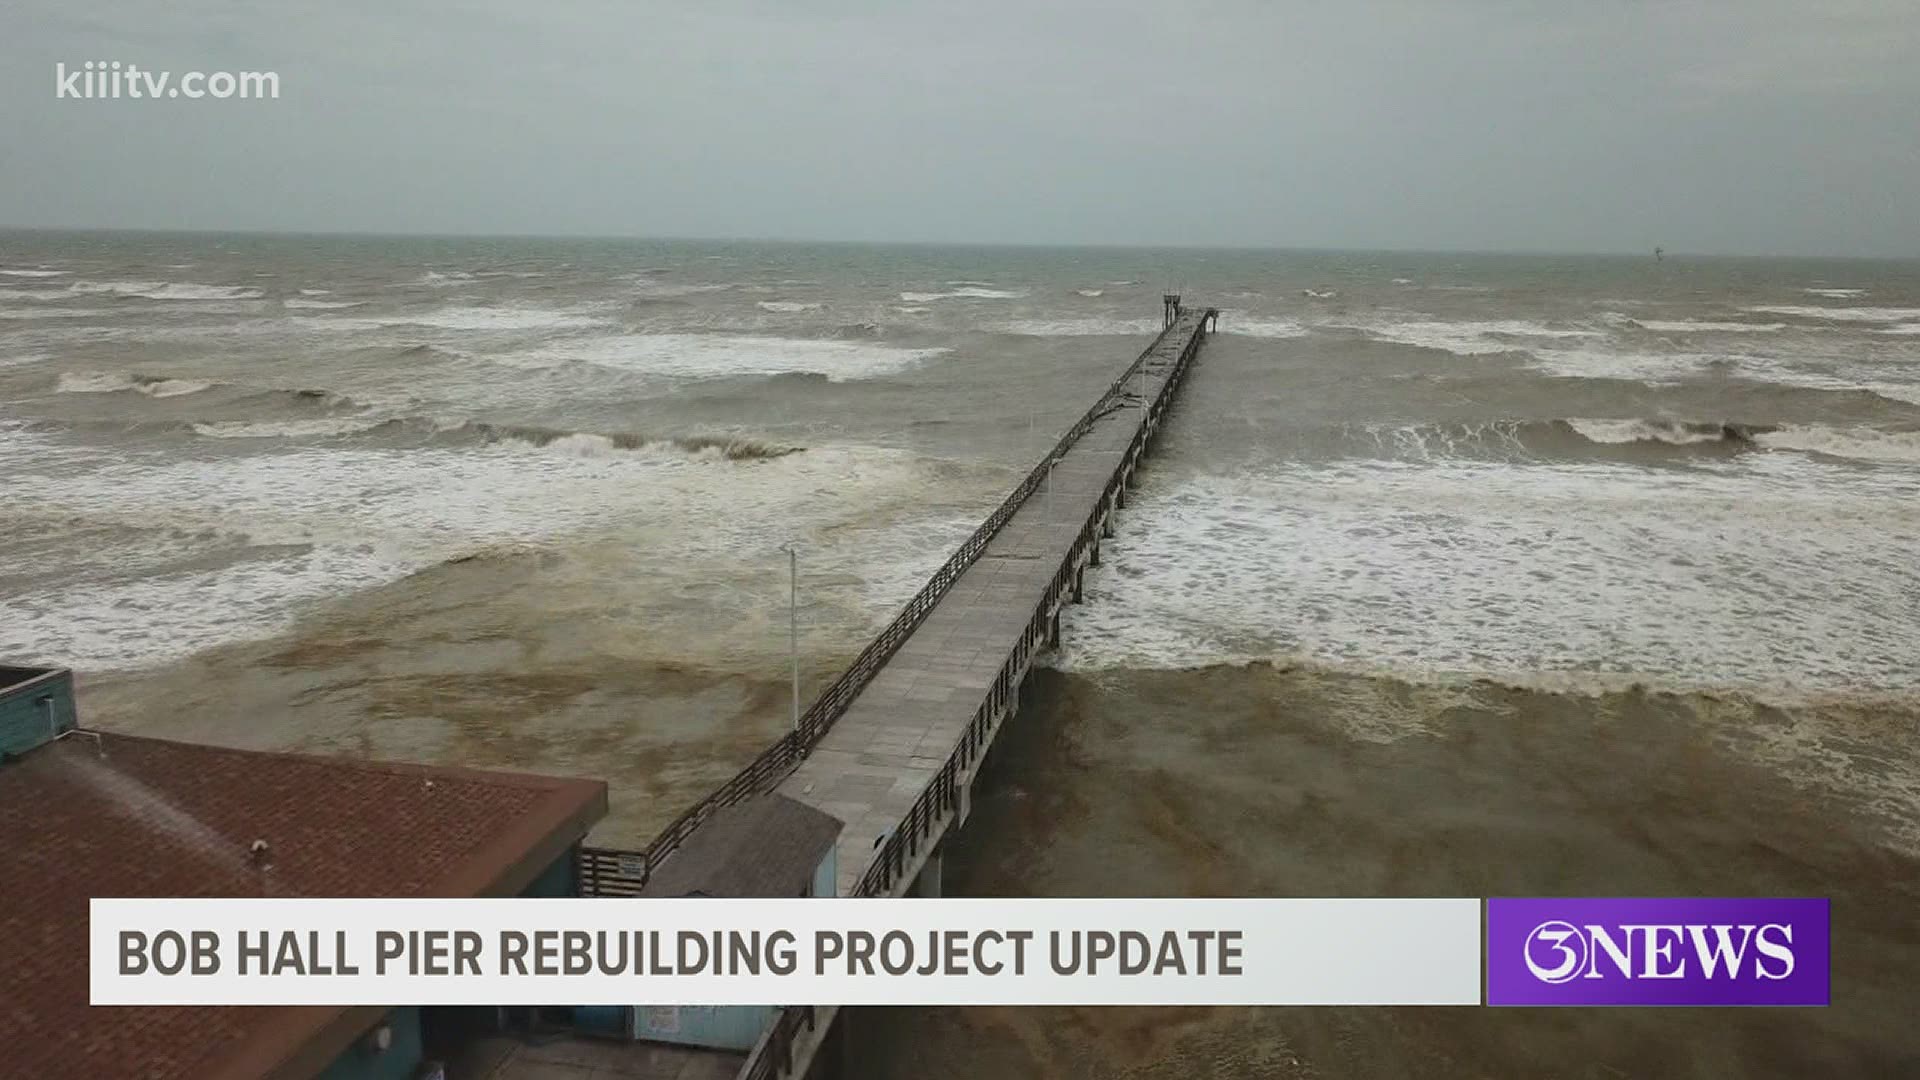 The pier was severely damaged during Hurricane Hanna. The new pier could be finished as early as 2023.